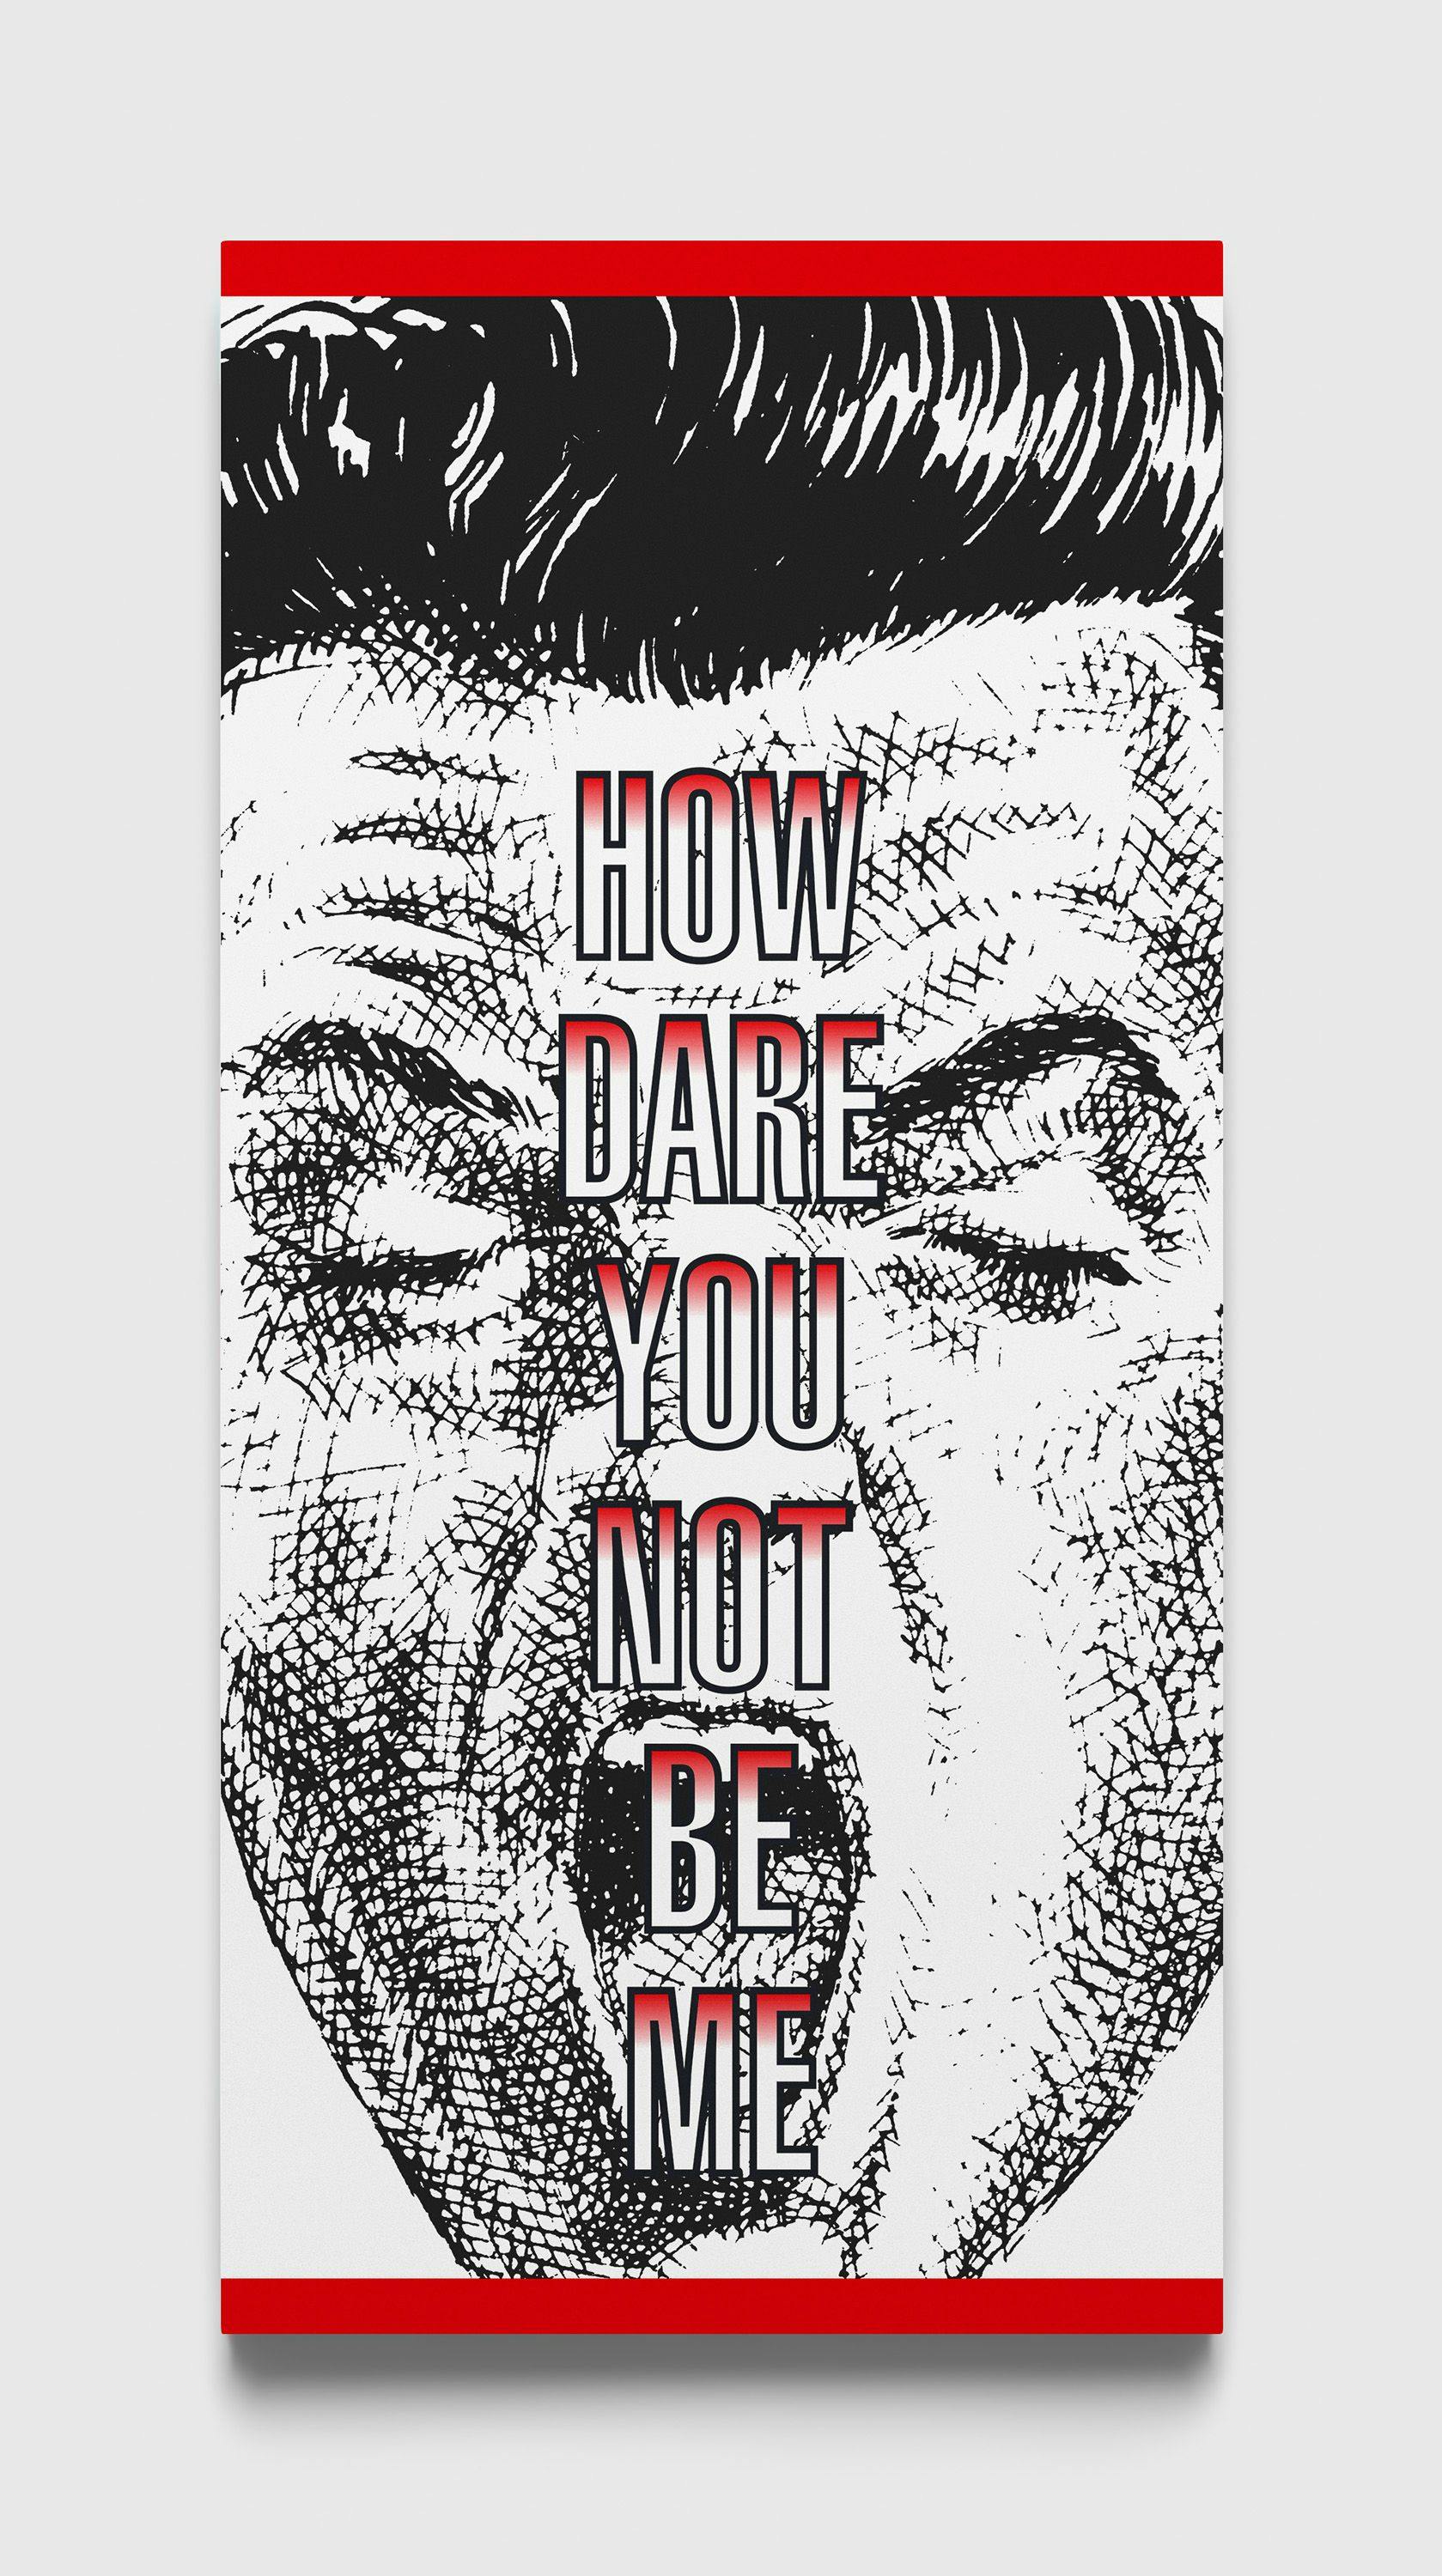 An installation work by Barbara Kruger, called Untitled (How dare you not be me), dated 2024.